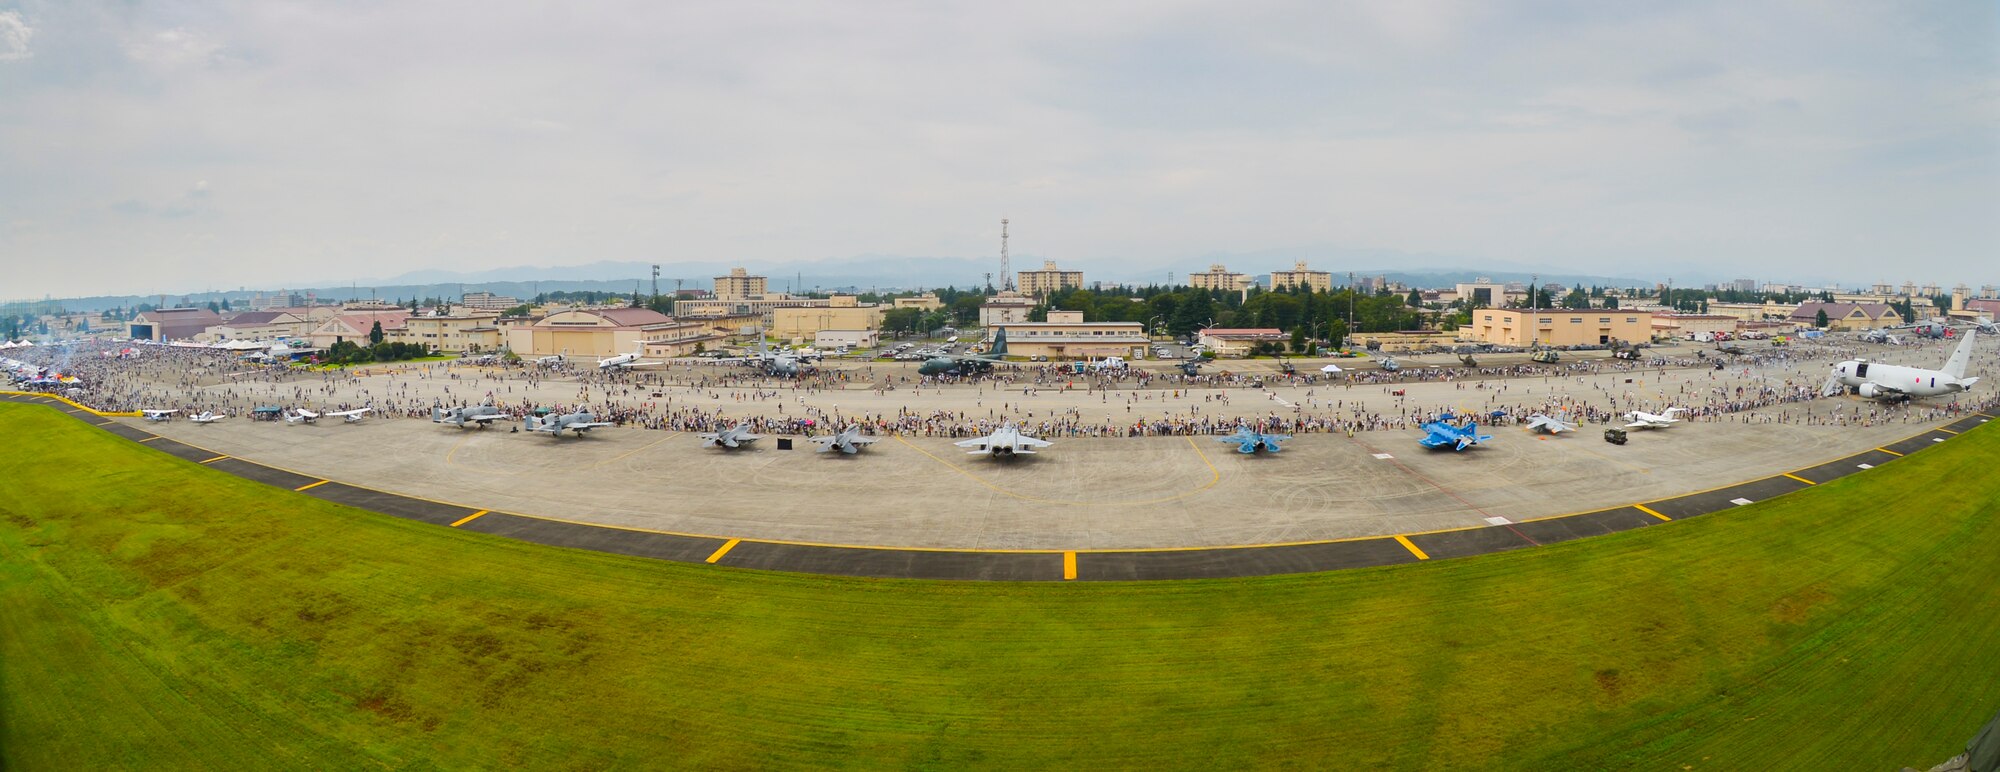 The 36th Airlift Squadron demonstrates a low-cost, low-altitude cargo drop on the air field during the 2016 Japanese-American Friendship Festival at Yokota Air Base, Japan, Sept. 17, 2016. The festival hosted food vendors, static aircraft displays, live entertainment and military and government demonstrations.  (U.S. Air Force photo by Airman 1st Class Elizabeth Baker/Released)